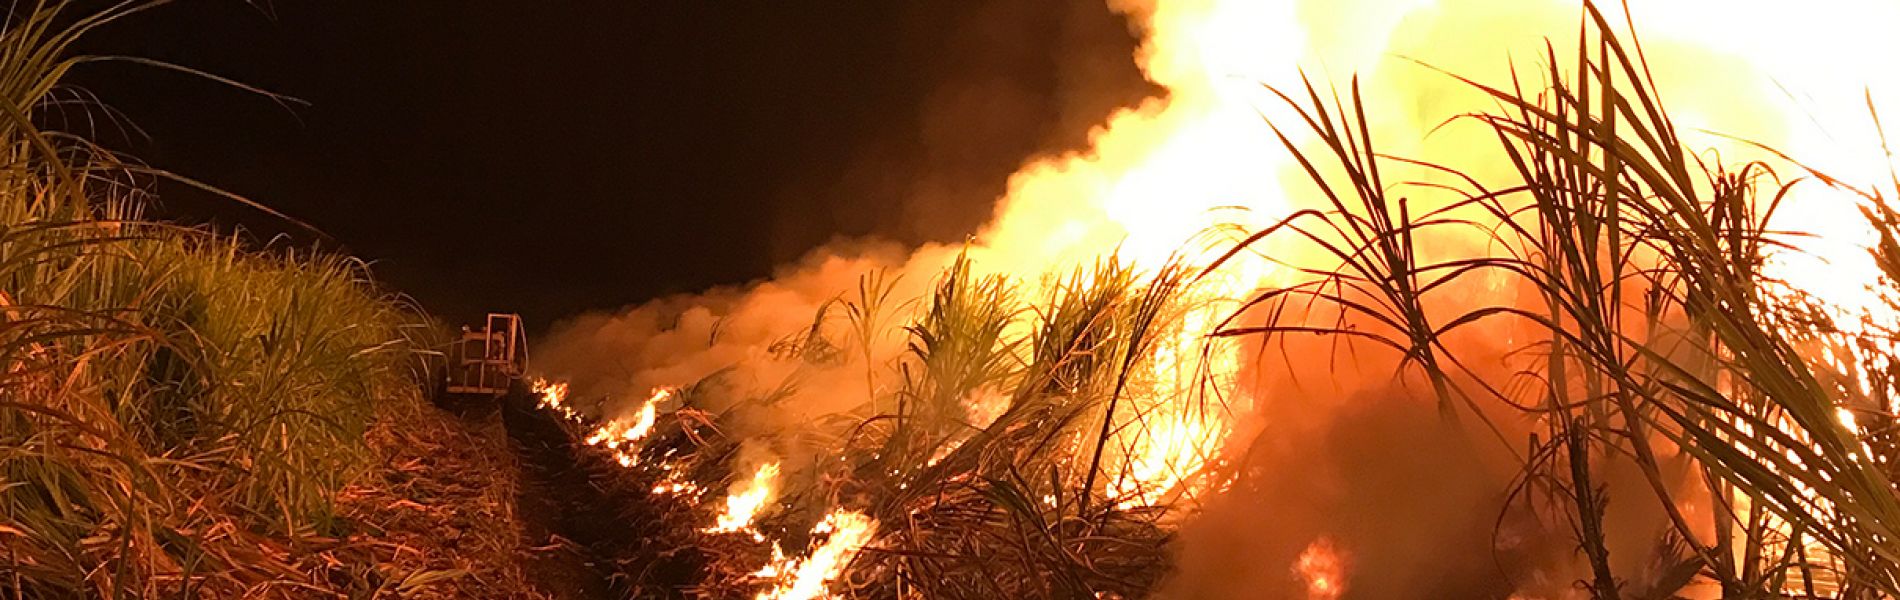 Cane fires burning in 2017